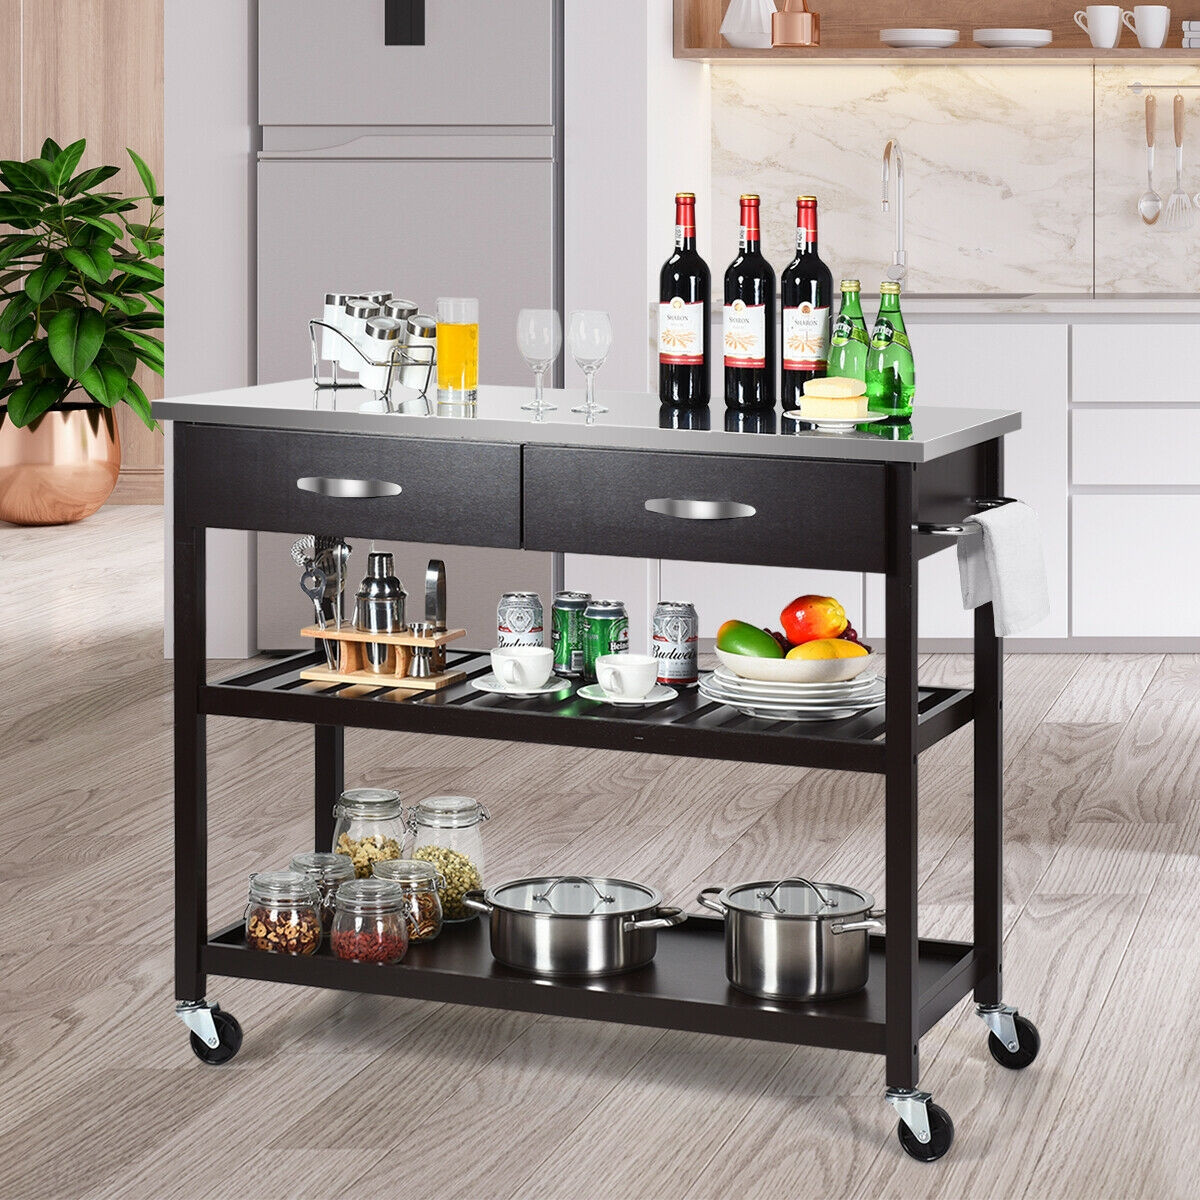 Stainless Steel Rolling Kitchen Island Trolley Cart